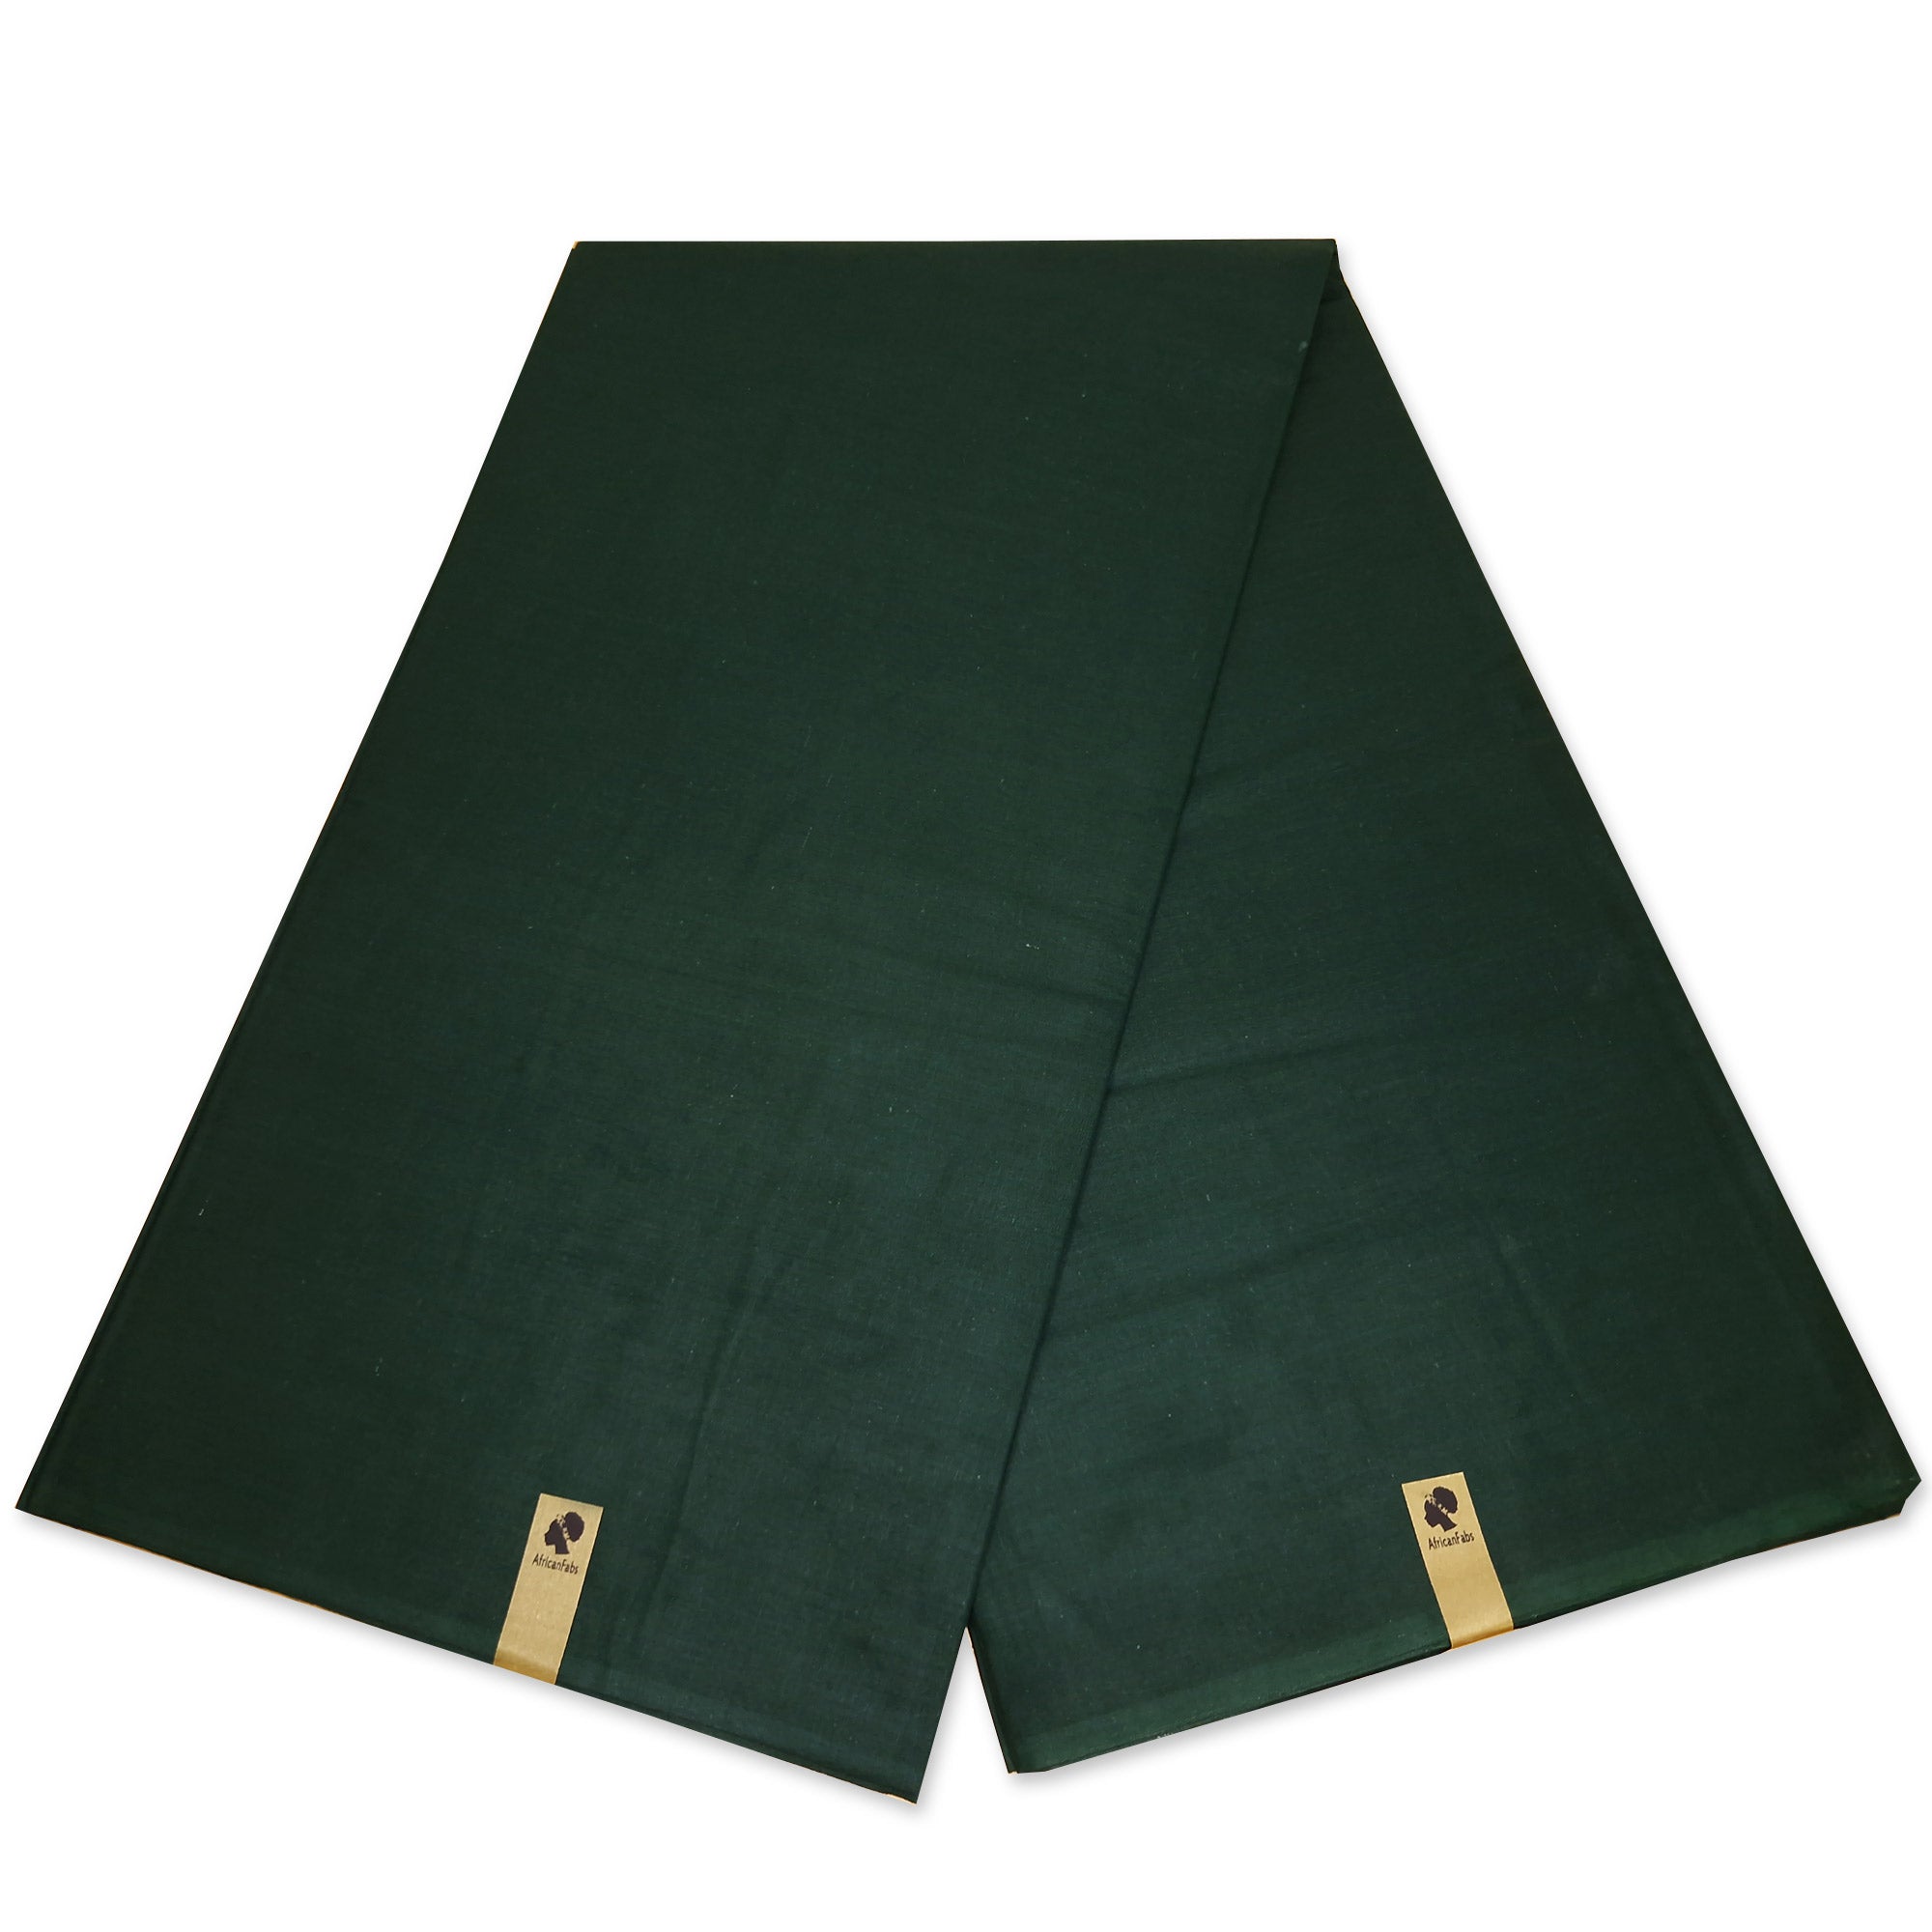 Green Plain Fabric - Green solid color - 100% cotton